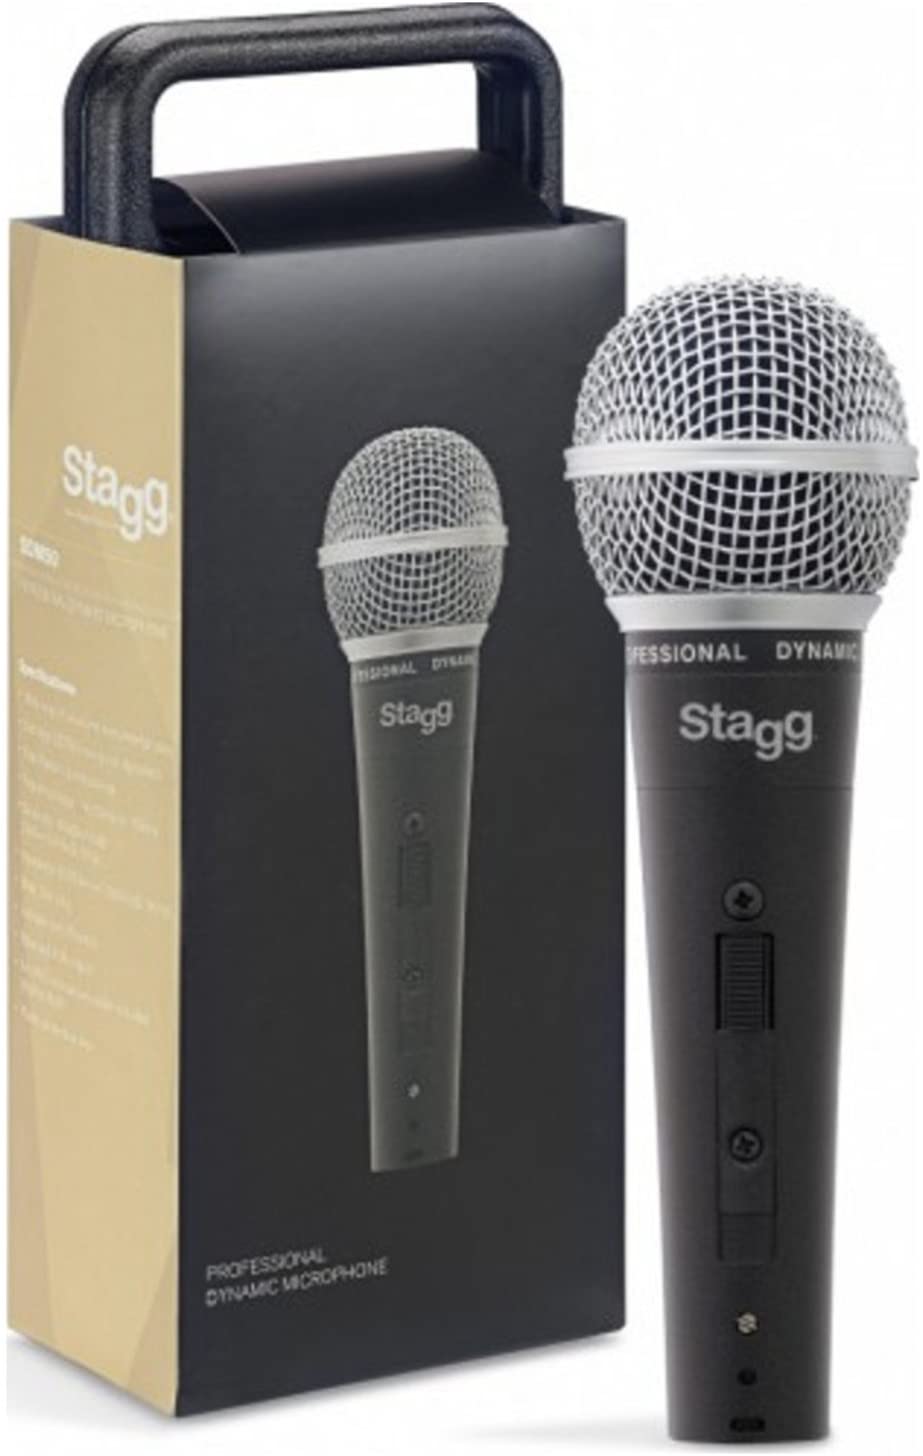 Stagg SDM50 Professional Dynamic Microphone Guitars on Main